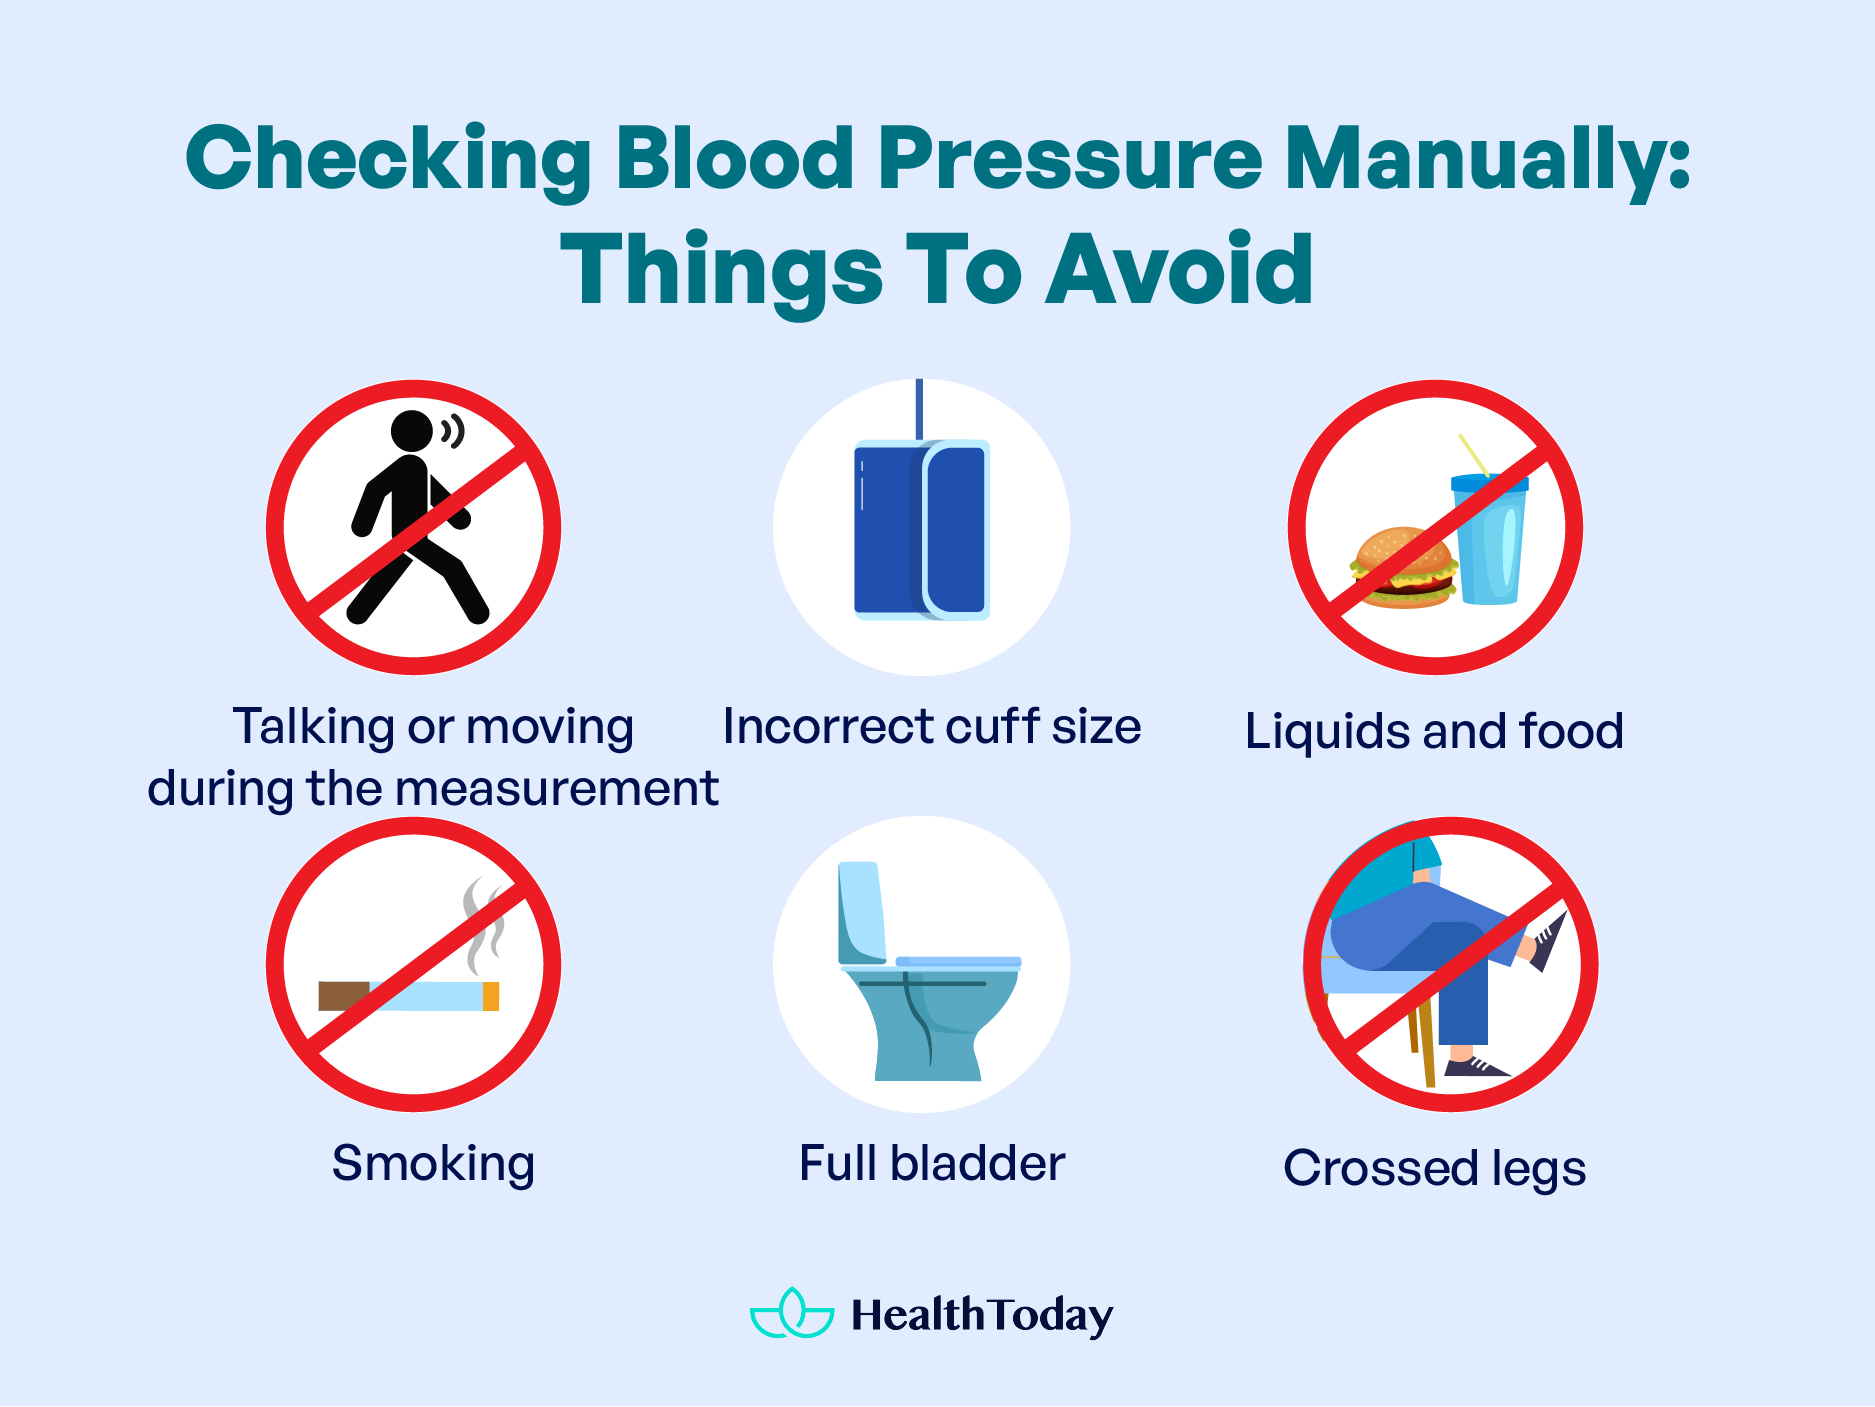 Checking Blood Pressure Manually With and Without a Cuff 01